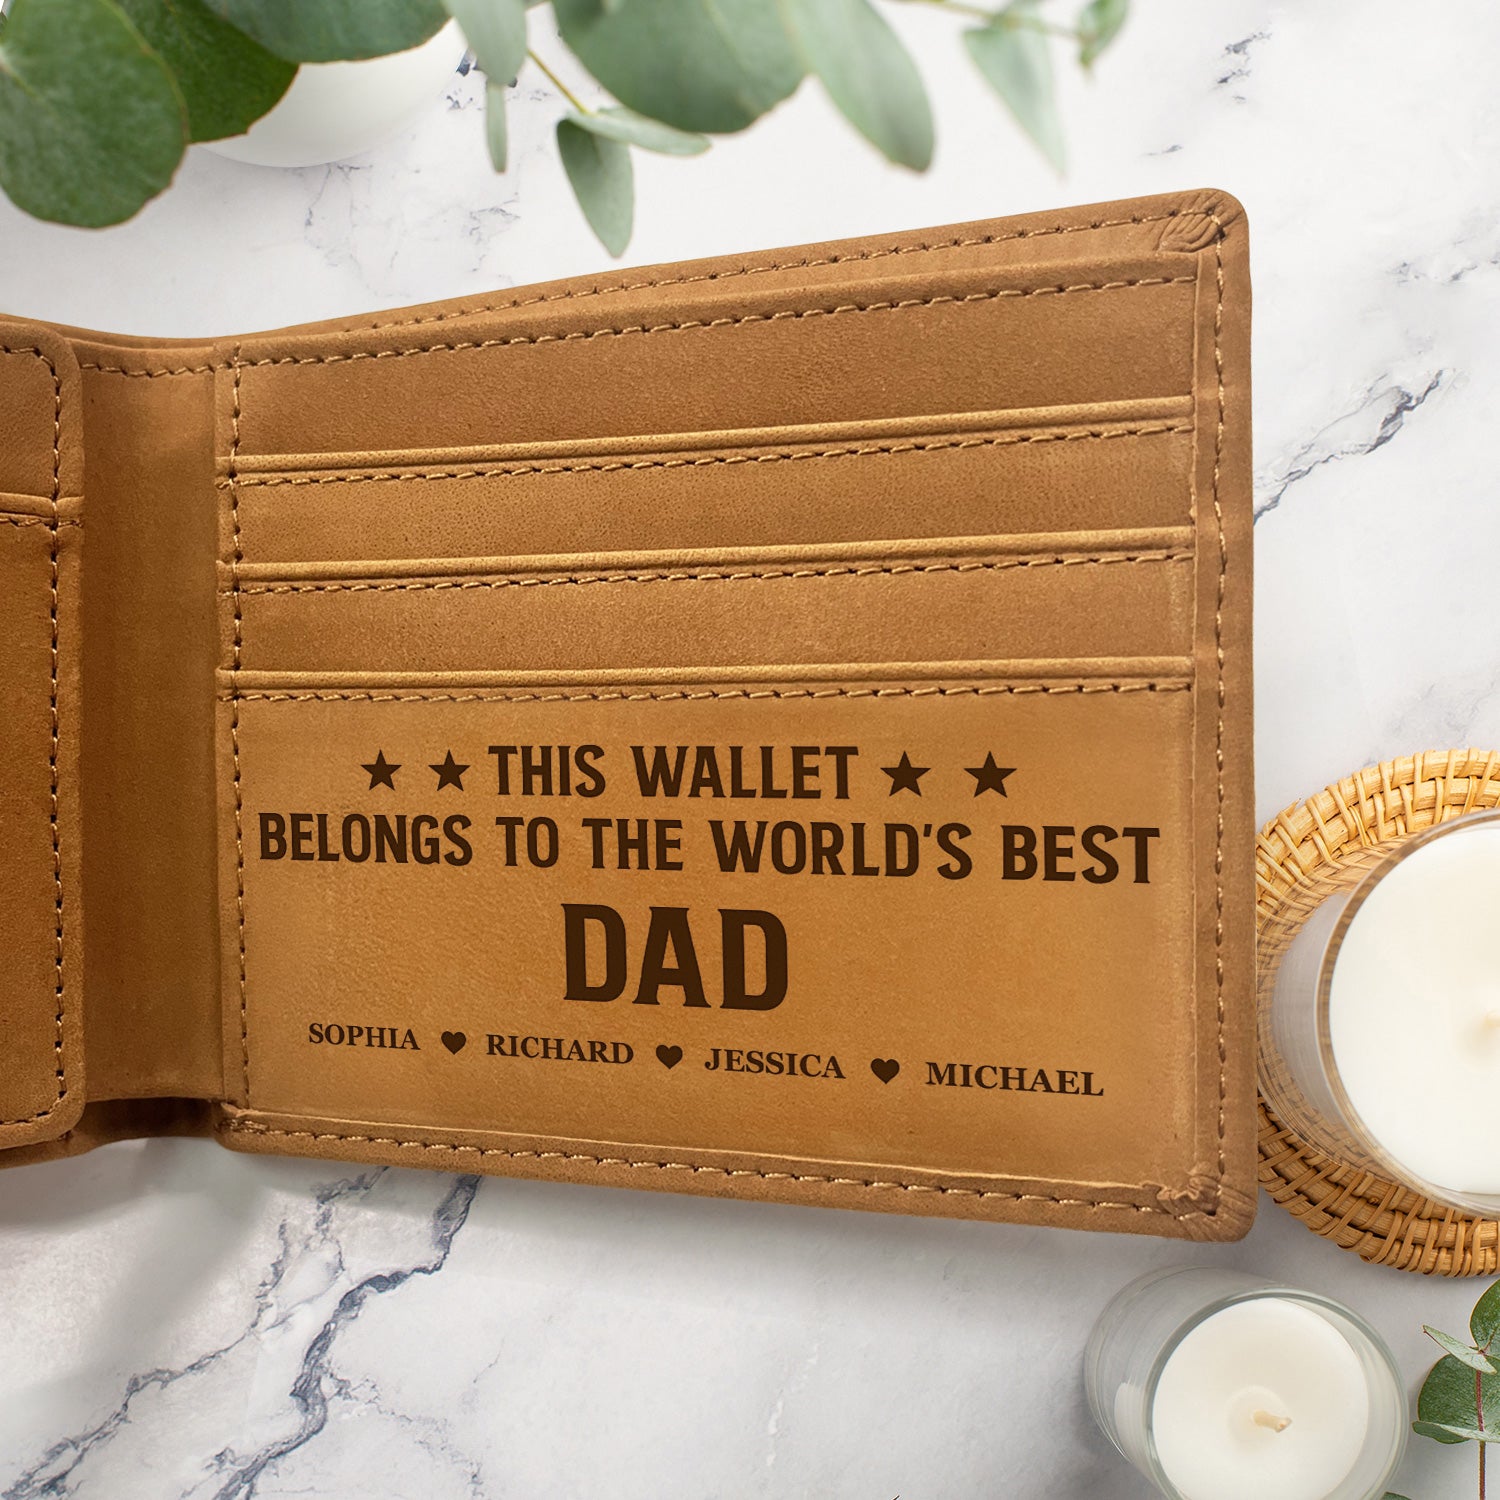 This Wallet Belongs To The World's Best Dad - Personalized Bifold Wallet